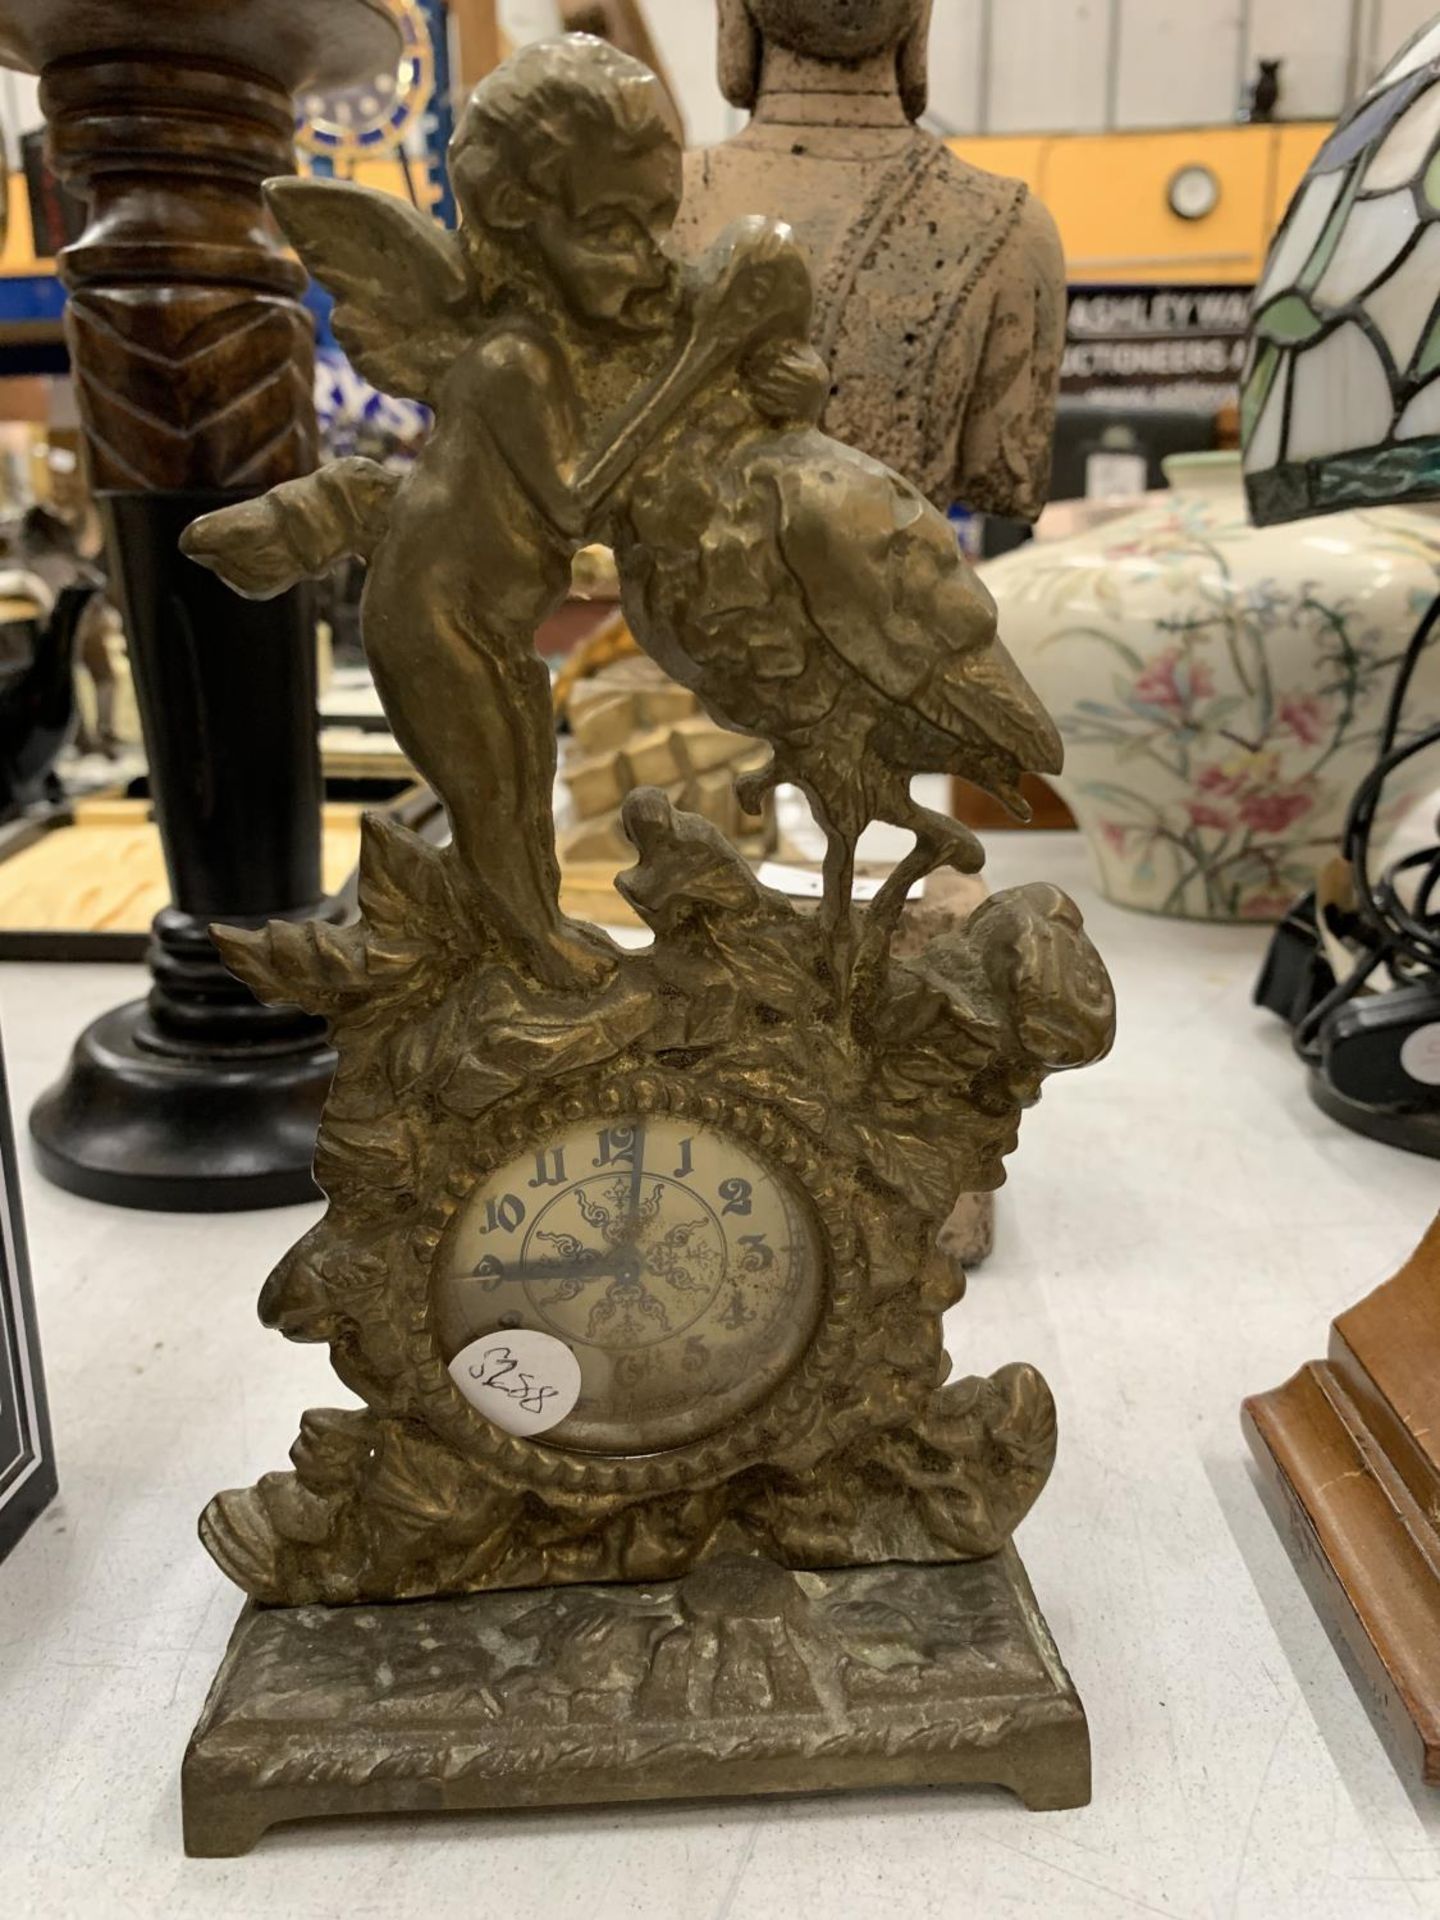 A VINTAGE BRASS ALARM CLOCK WITH ORNATE CHERUB AND STORK DETAIL PLUS A WHITE METAL TRINKET BOX - Image 2 of 6